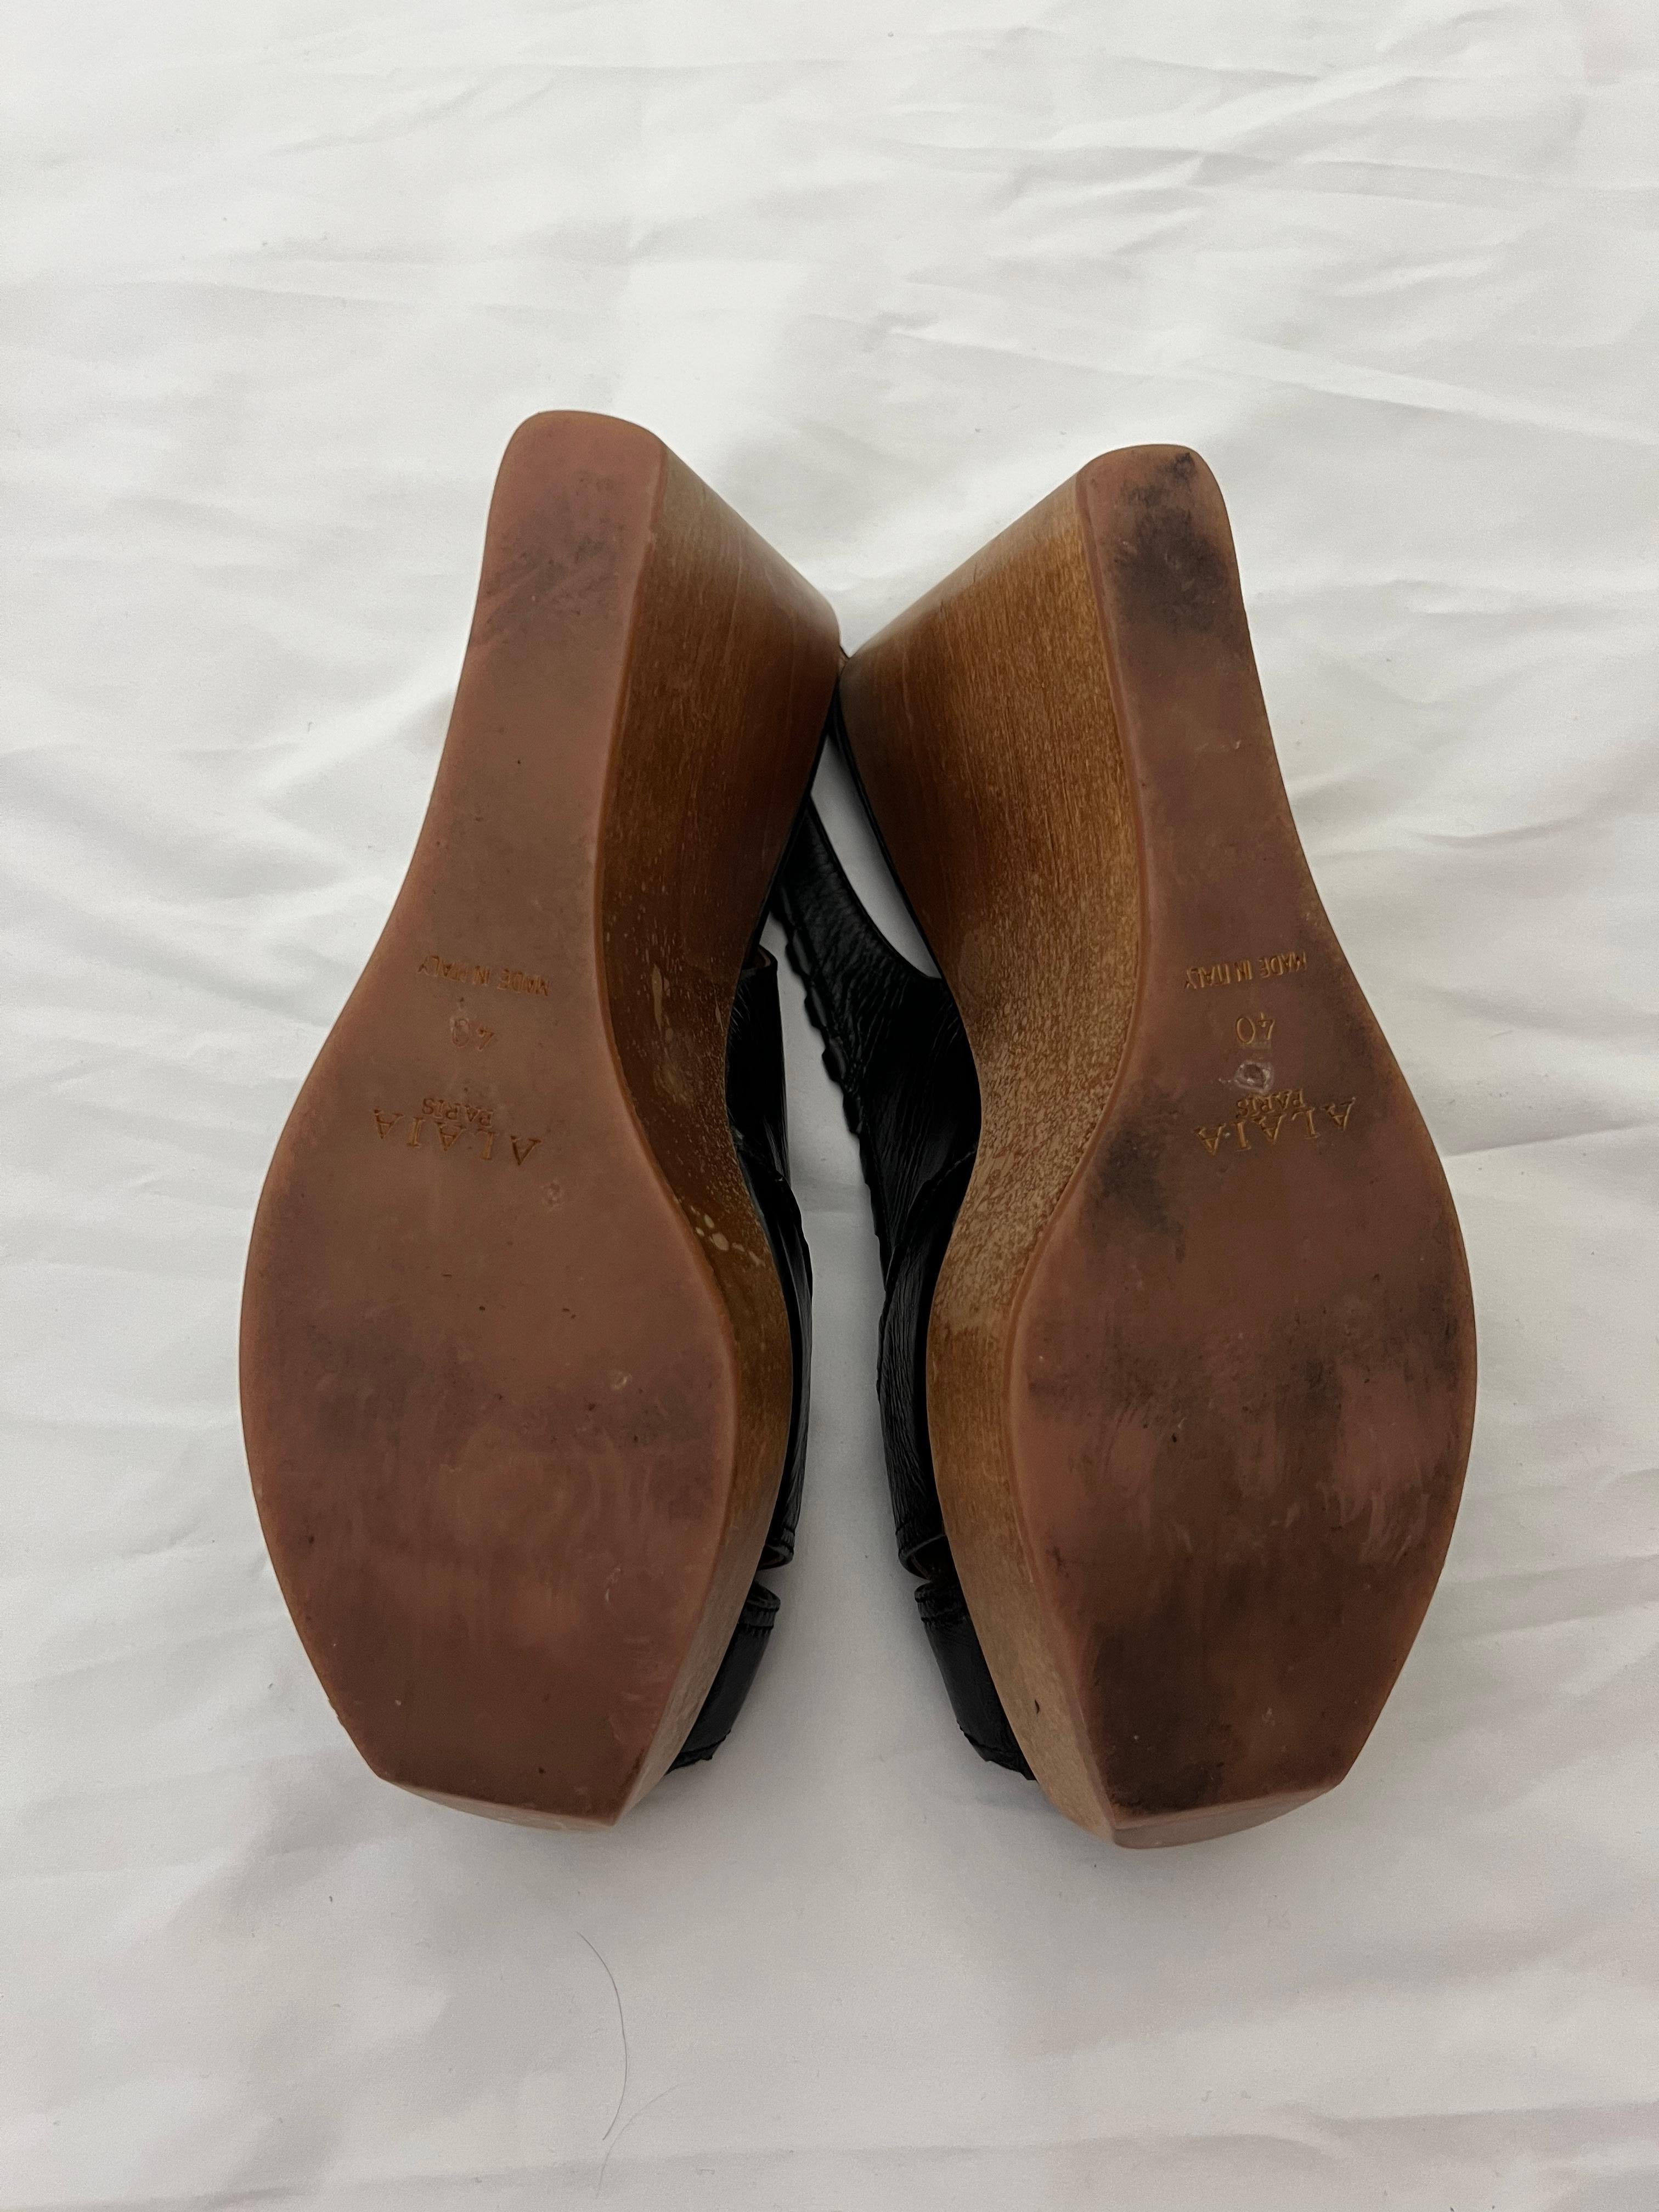 Alaia Paris Leather and Wood Platform Wedge Sandals, Size 40 For Sale 1